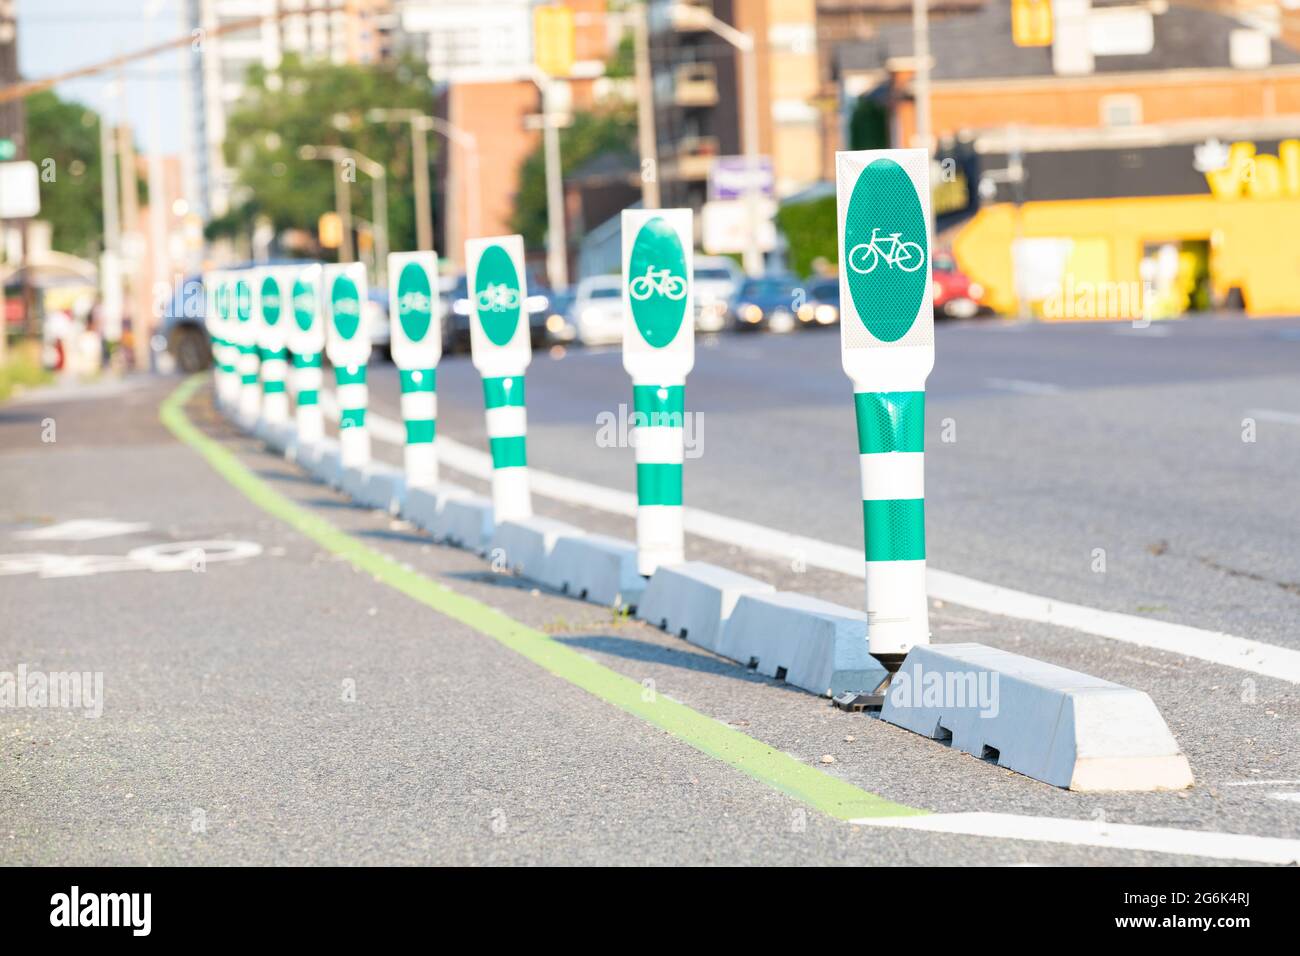 Safety barriers for bicycle lanes on the street, selective focus on the front green post with soft focus background. Stock Photo